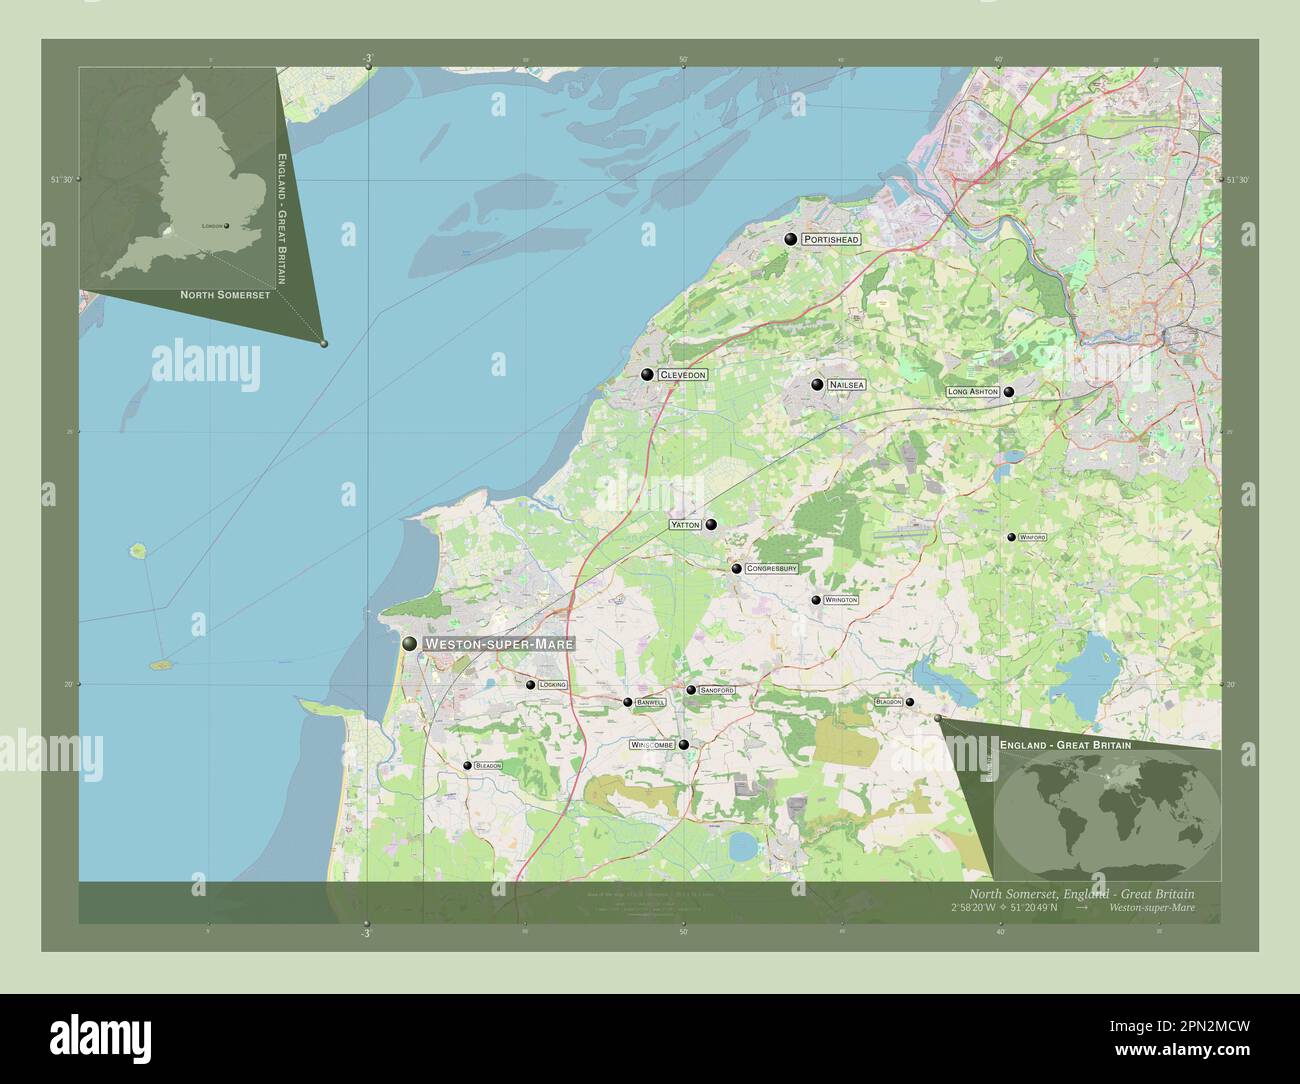 North Somerset, unitary authority of England - Great Britain. Open Street Map. Locations and names of major cities of the region. Corner auxiliary loc Stock Photo